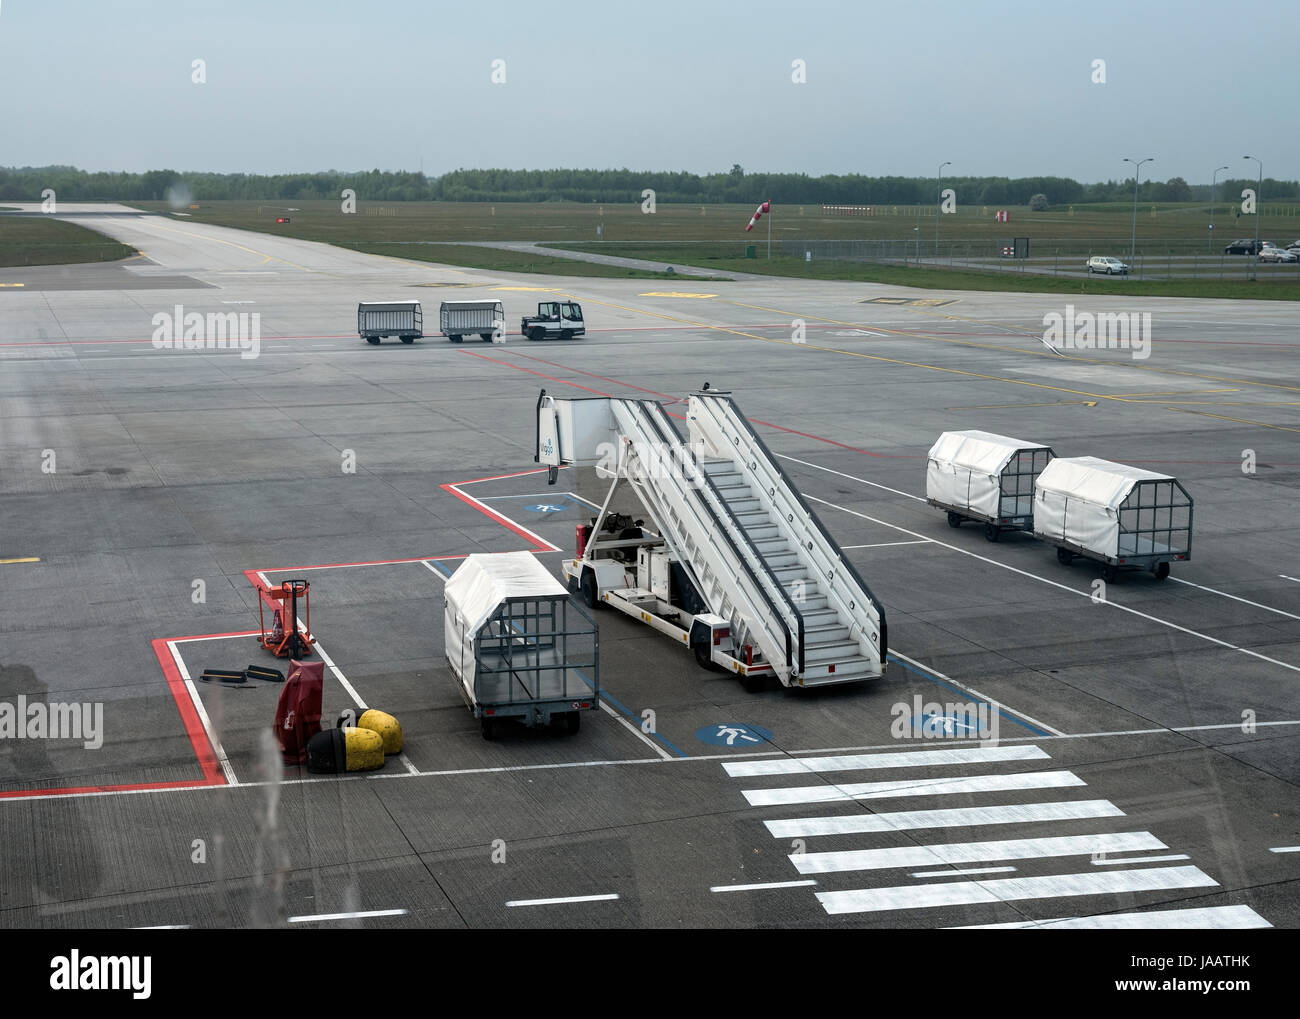 Eindhoven, Netherlands, 5 may 2017: empty airfield of Eindhoven Airport in the netherlands waiting for airplane and passengers Stock Photo